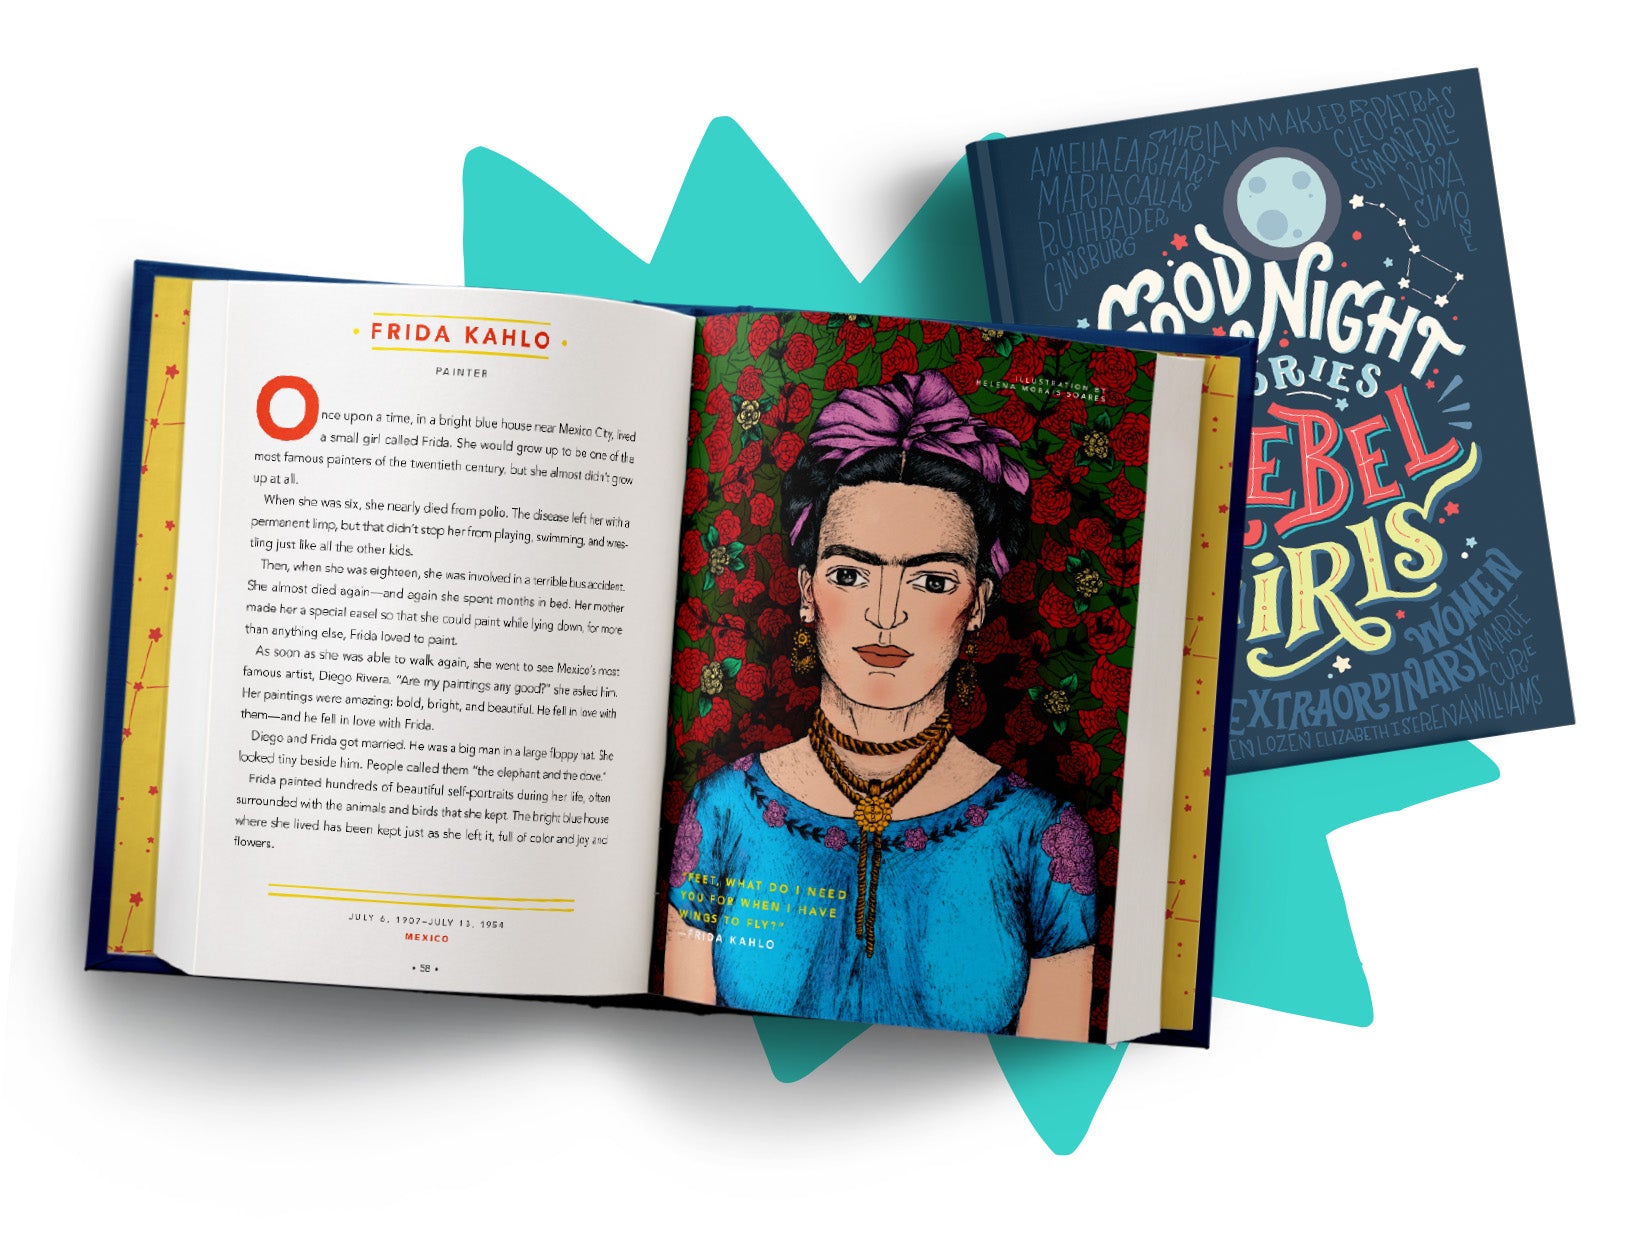 <p>The most successful publishing project in crowdfunding, this must-have volume brings readers on an empowering journey, introducing them to the real-life adventures of trailblazing women from Elizabeth I to Malala Yousafzai.</p>
<p>The unique narrative style of <em>Good Night Stories for Rebel Girls</em> transforms each biography into a fairytale, filling readers with wonder and a burning curiosity to know more about each hero. Each woman&#8217;s story is accompanied by a full-page, full-color portrait that captures her rebel spirit.</p>
<p>This hardcover edition, with an extra-smooth matte scuff-free lamination, 100lb paper, a satin ribbon bookmark, and extraordinary print quality, is the perfect gift for any young reader, and begs to be read again and again.</p>
